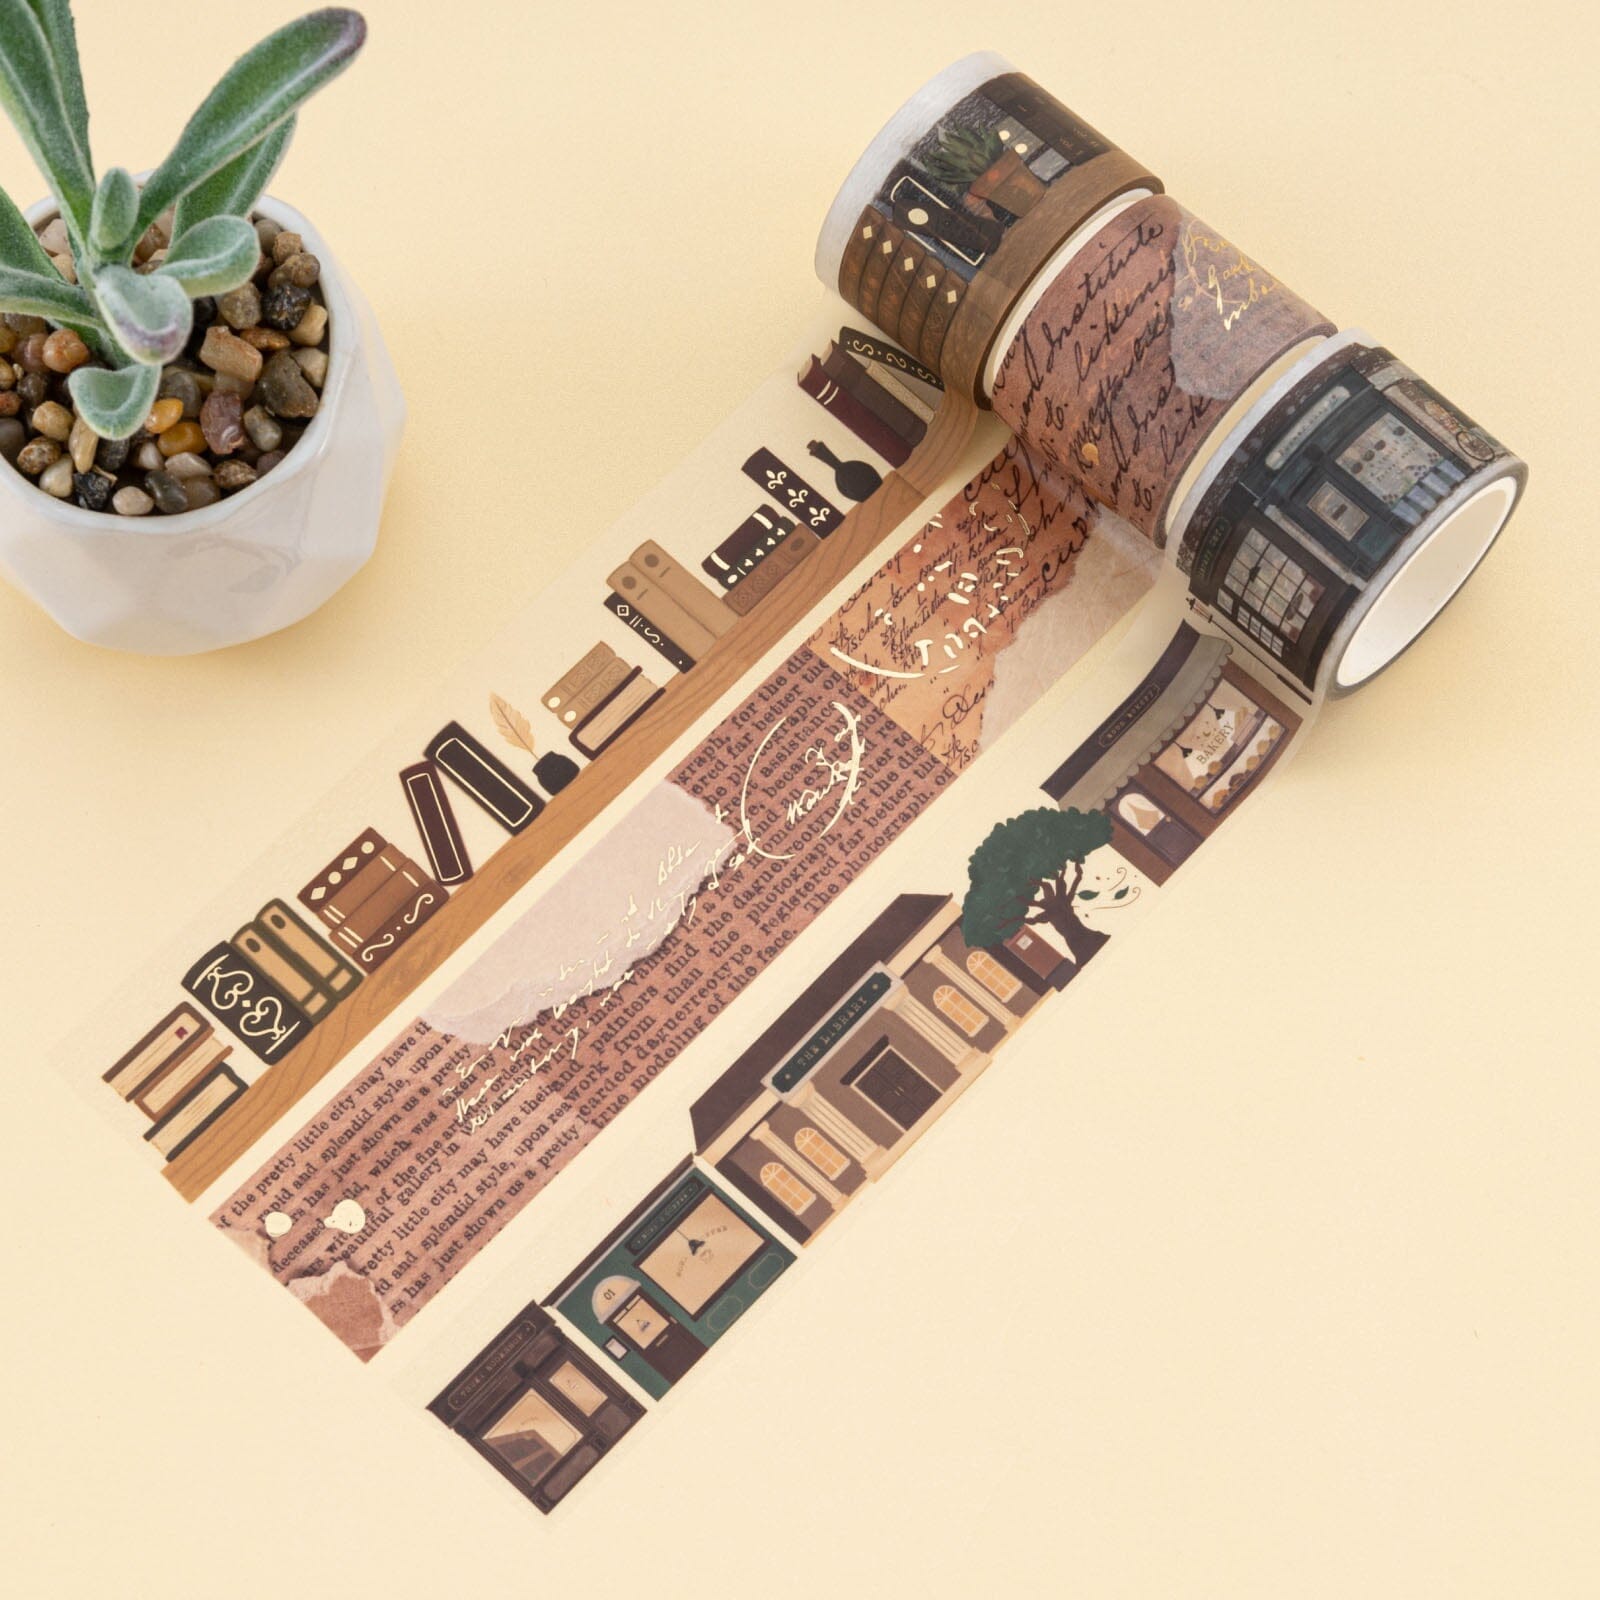 3x washi tape rolls with bookish aesthetic on cream background